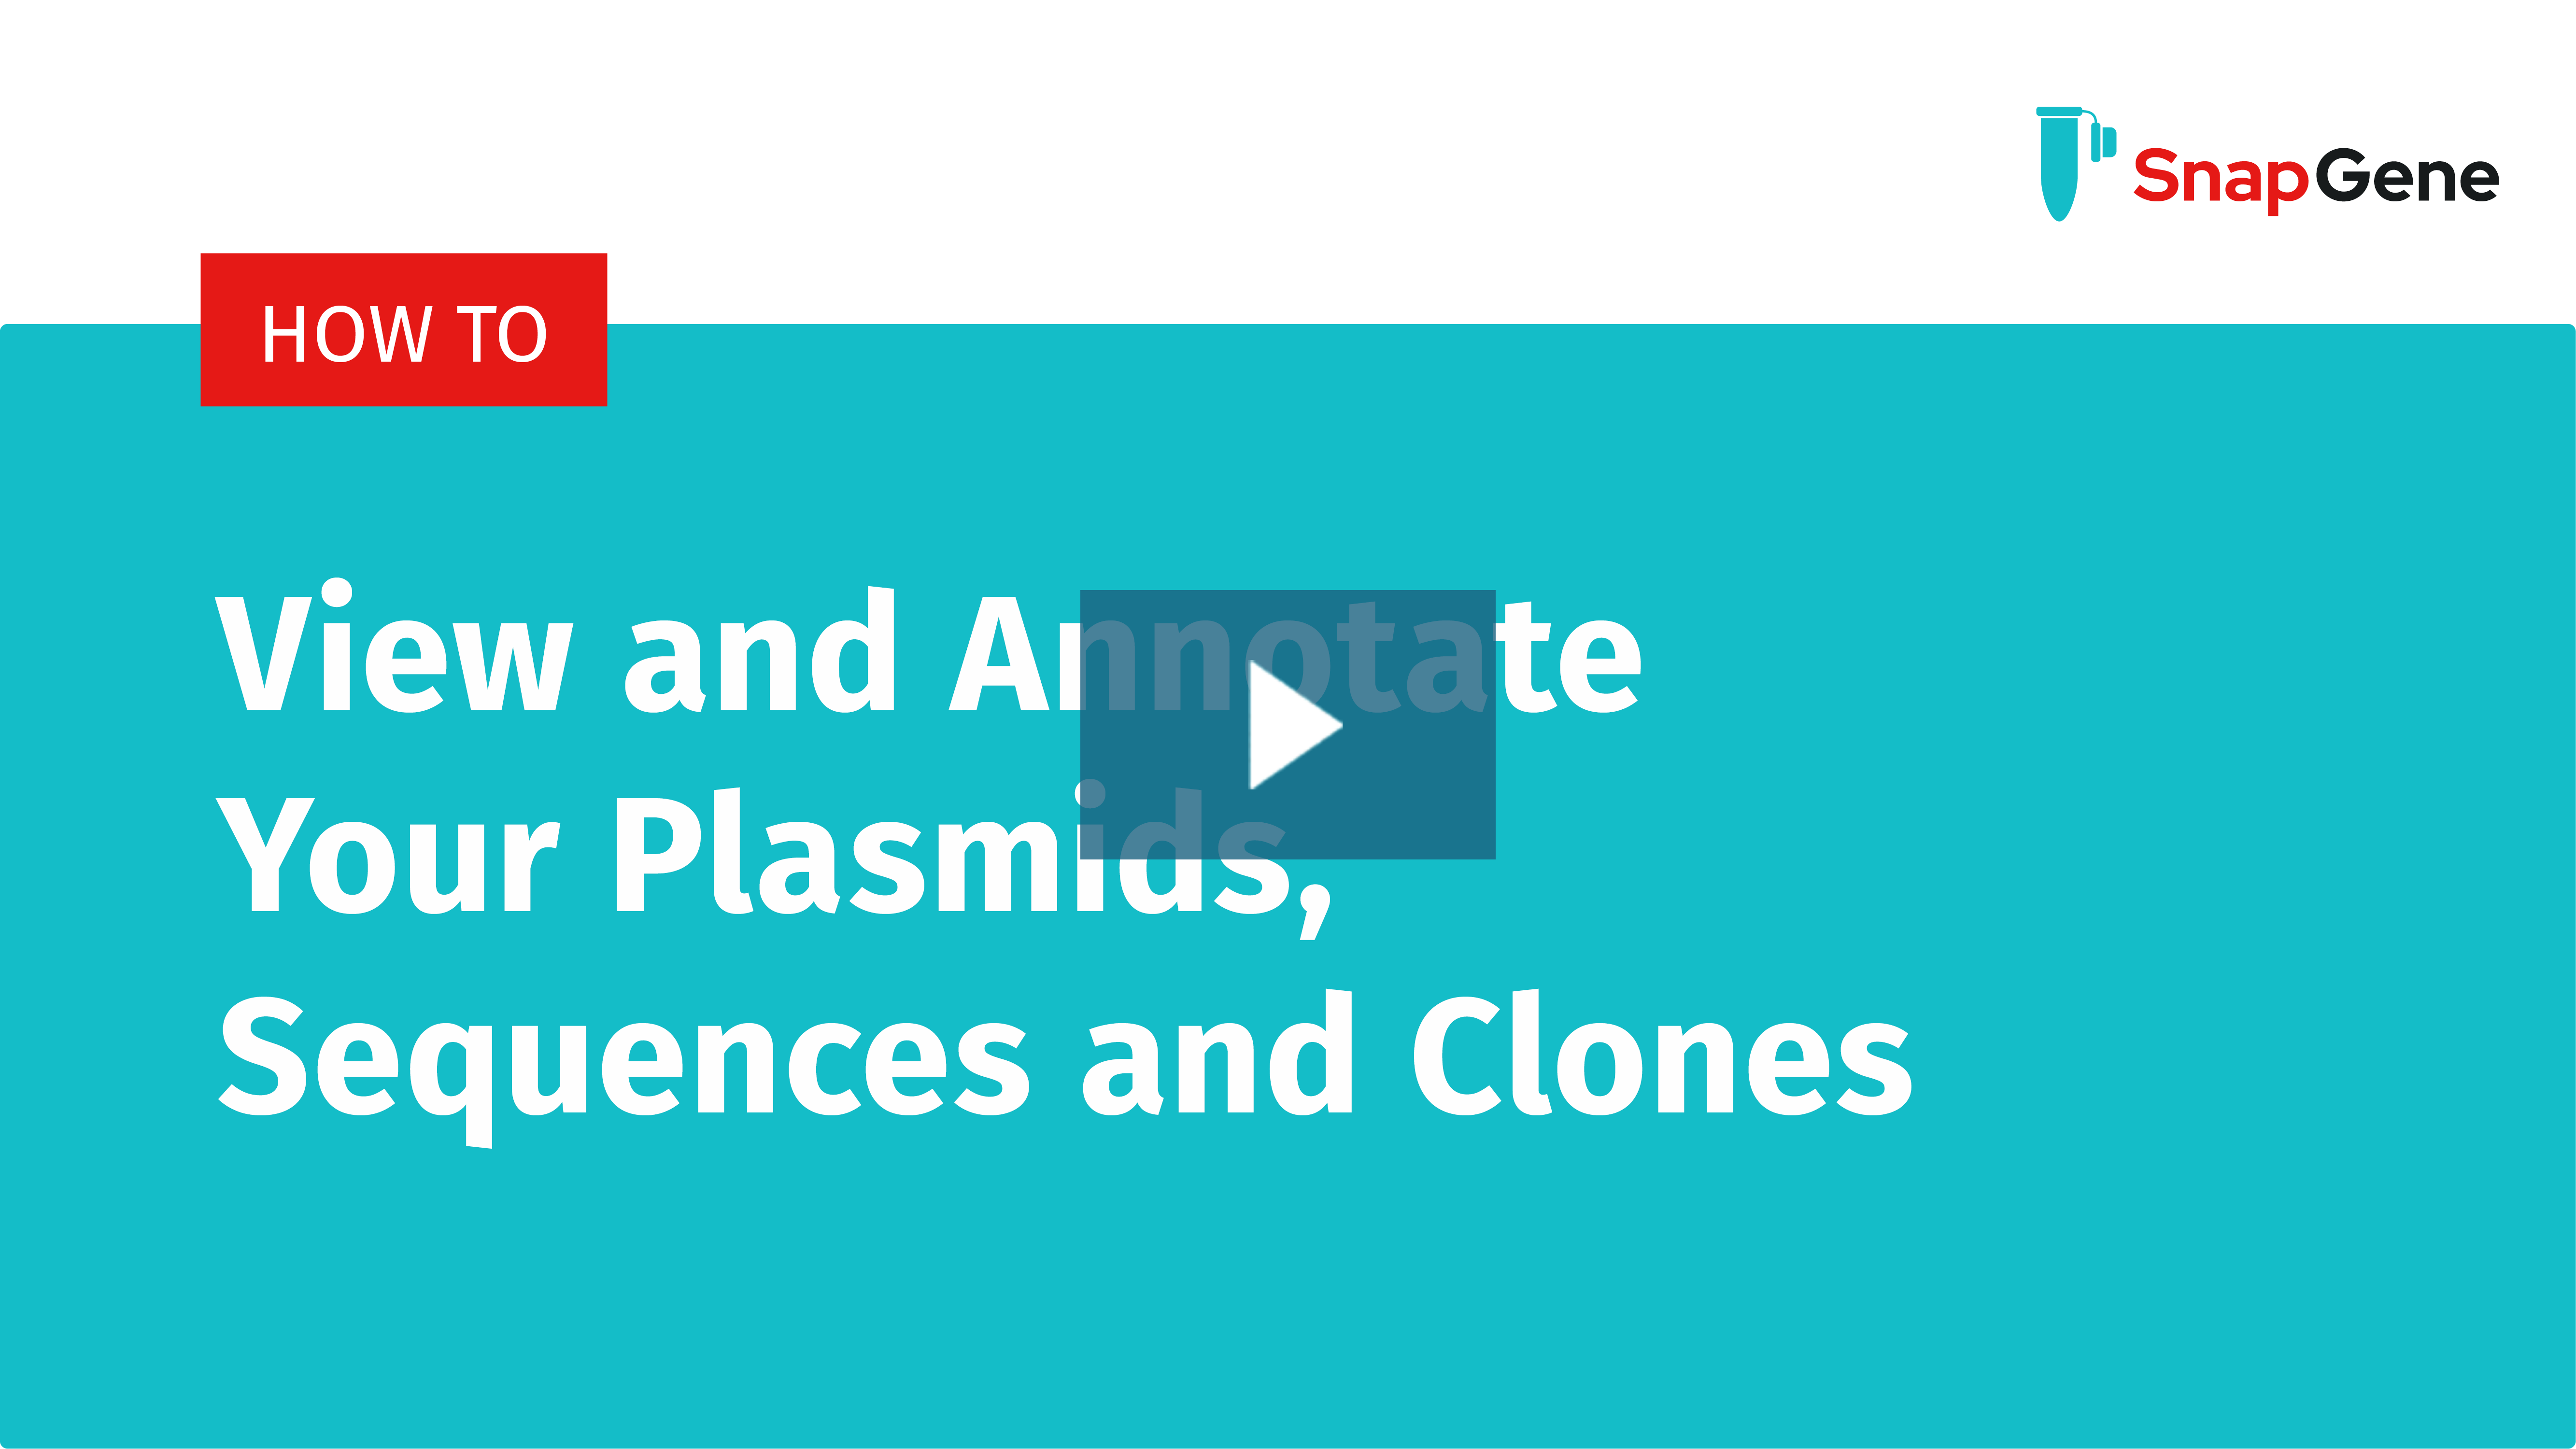 View and Annotate Your Plasmids, Sequences and Clones